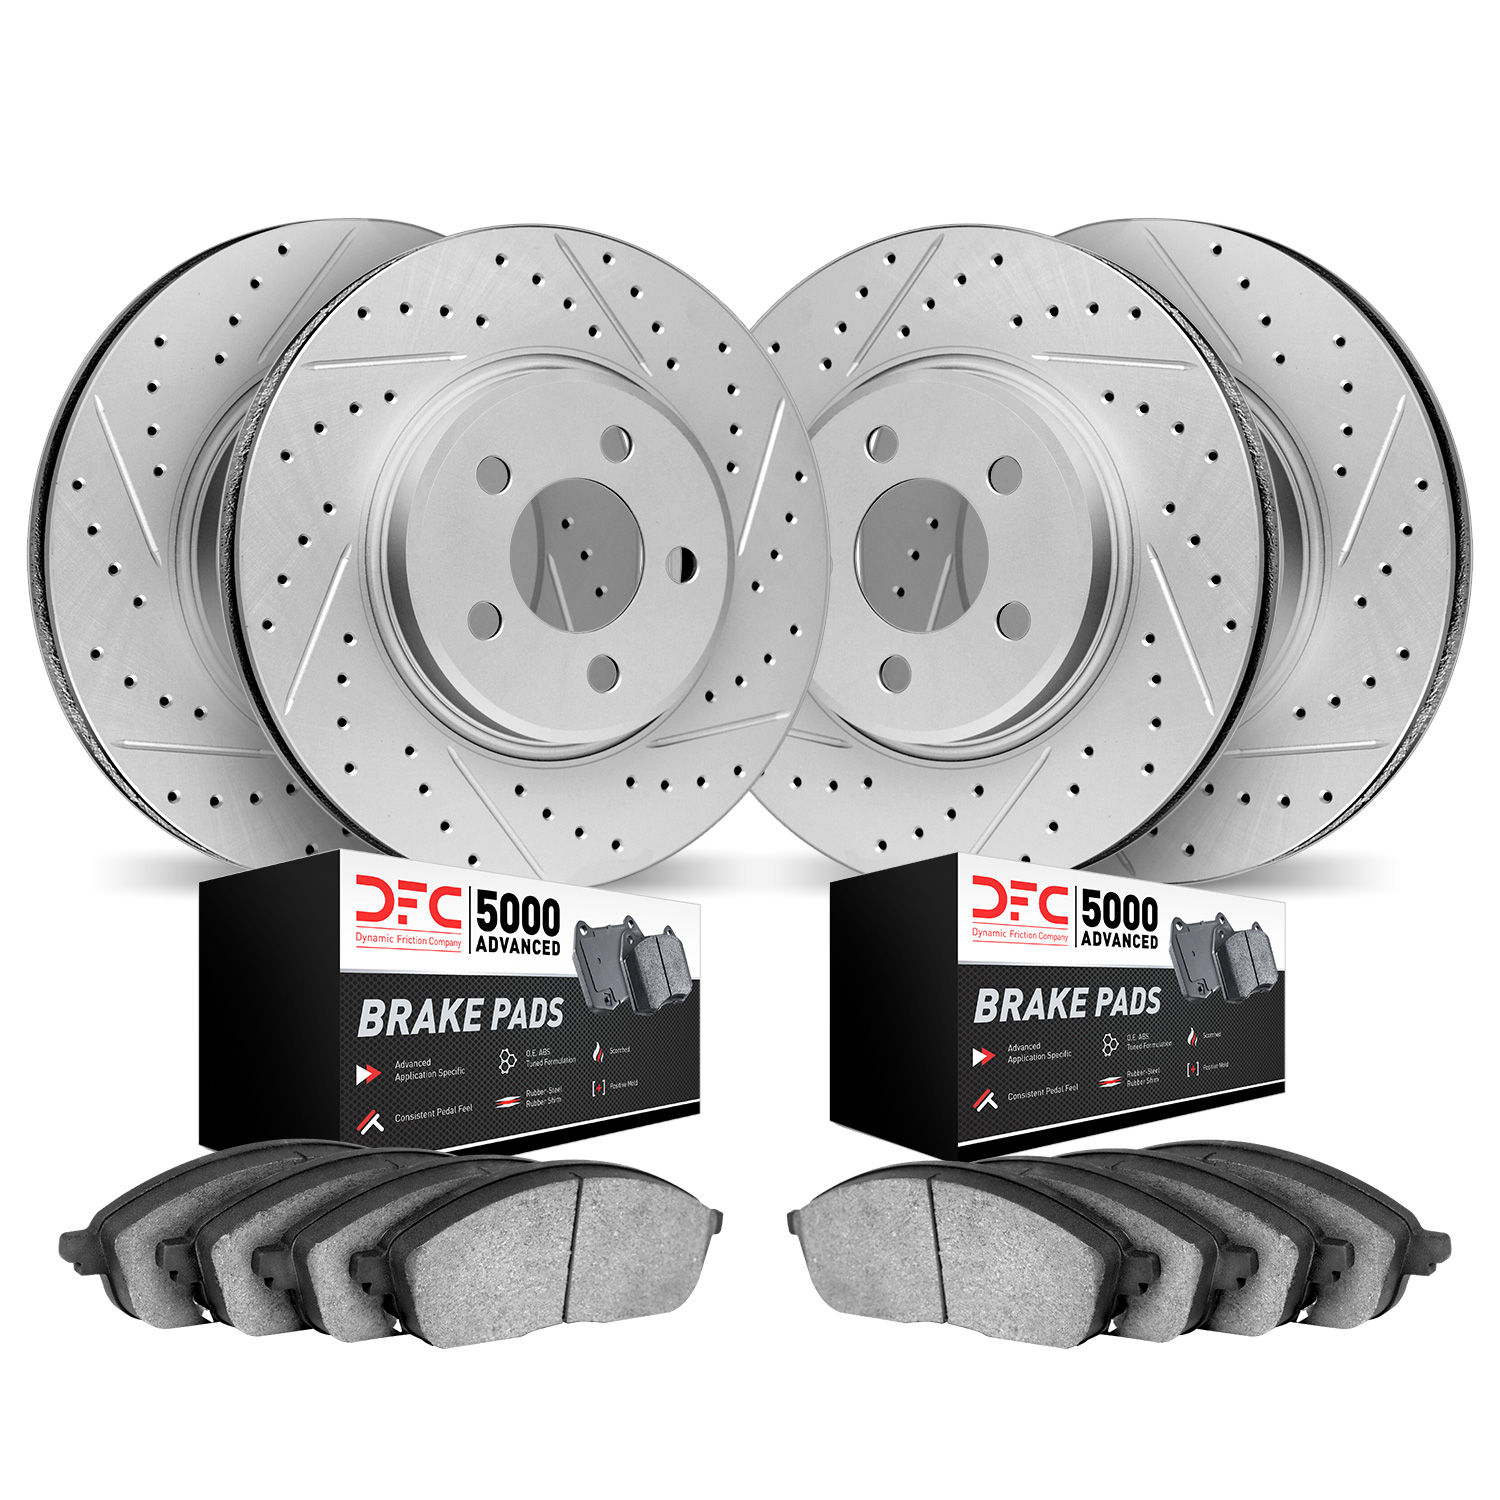 2504-31011 Geoperformance Drilled/Slotted Rotors w/5000 Advanced Brake Pads Kit, 2008-2010 BMW, Position: Front and Rear